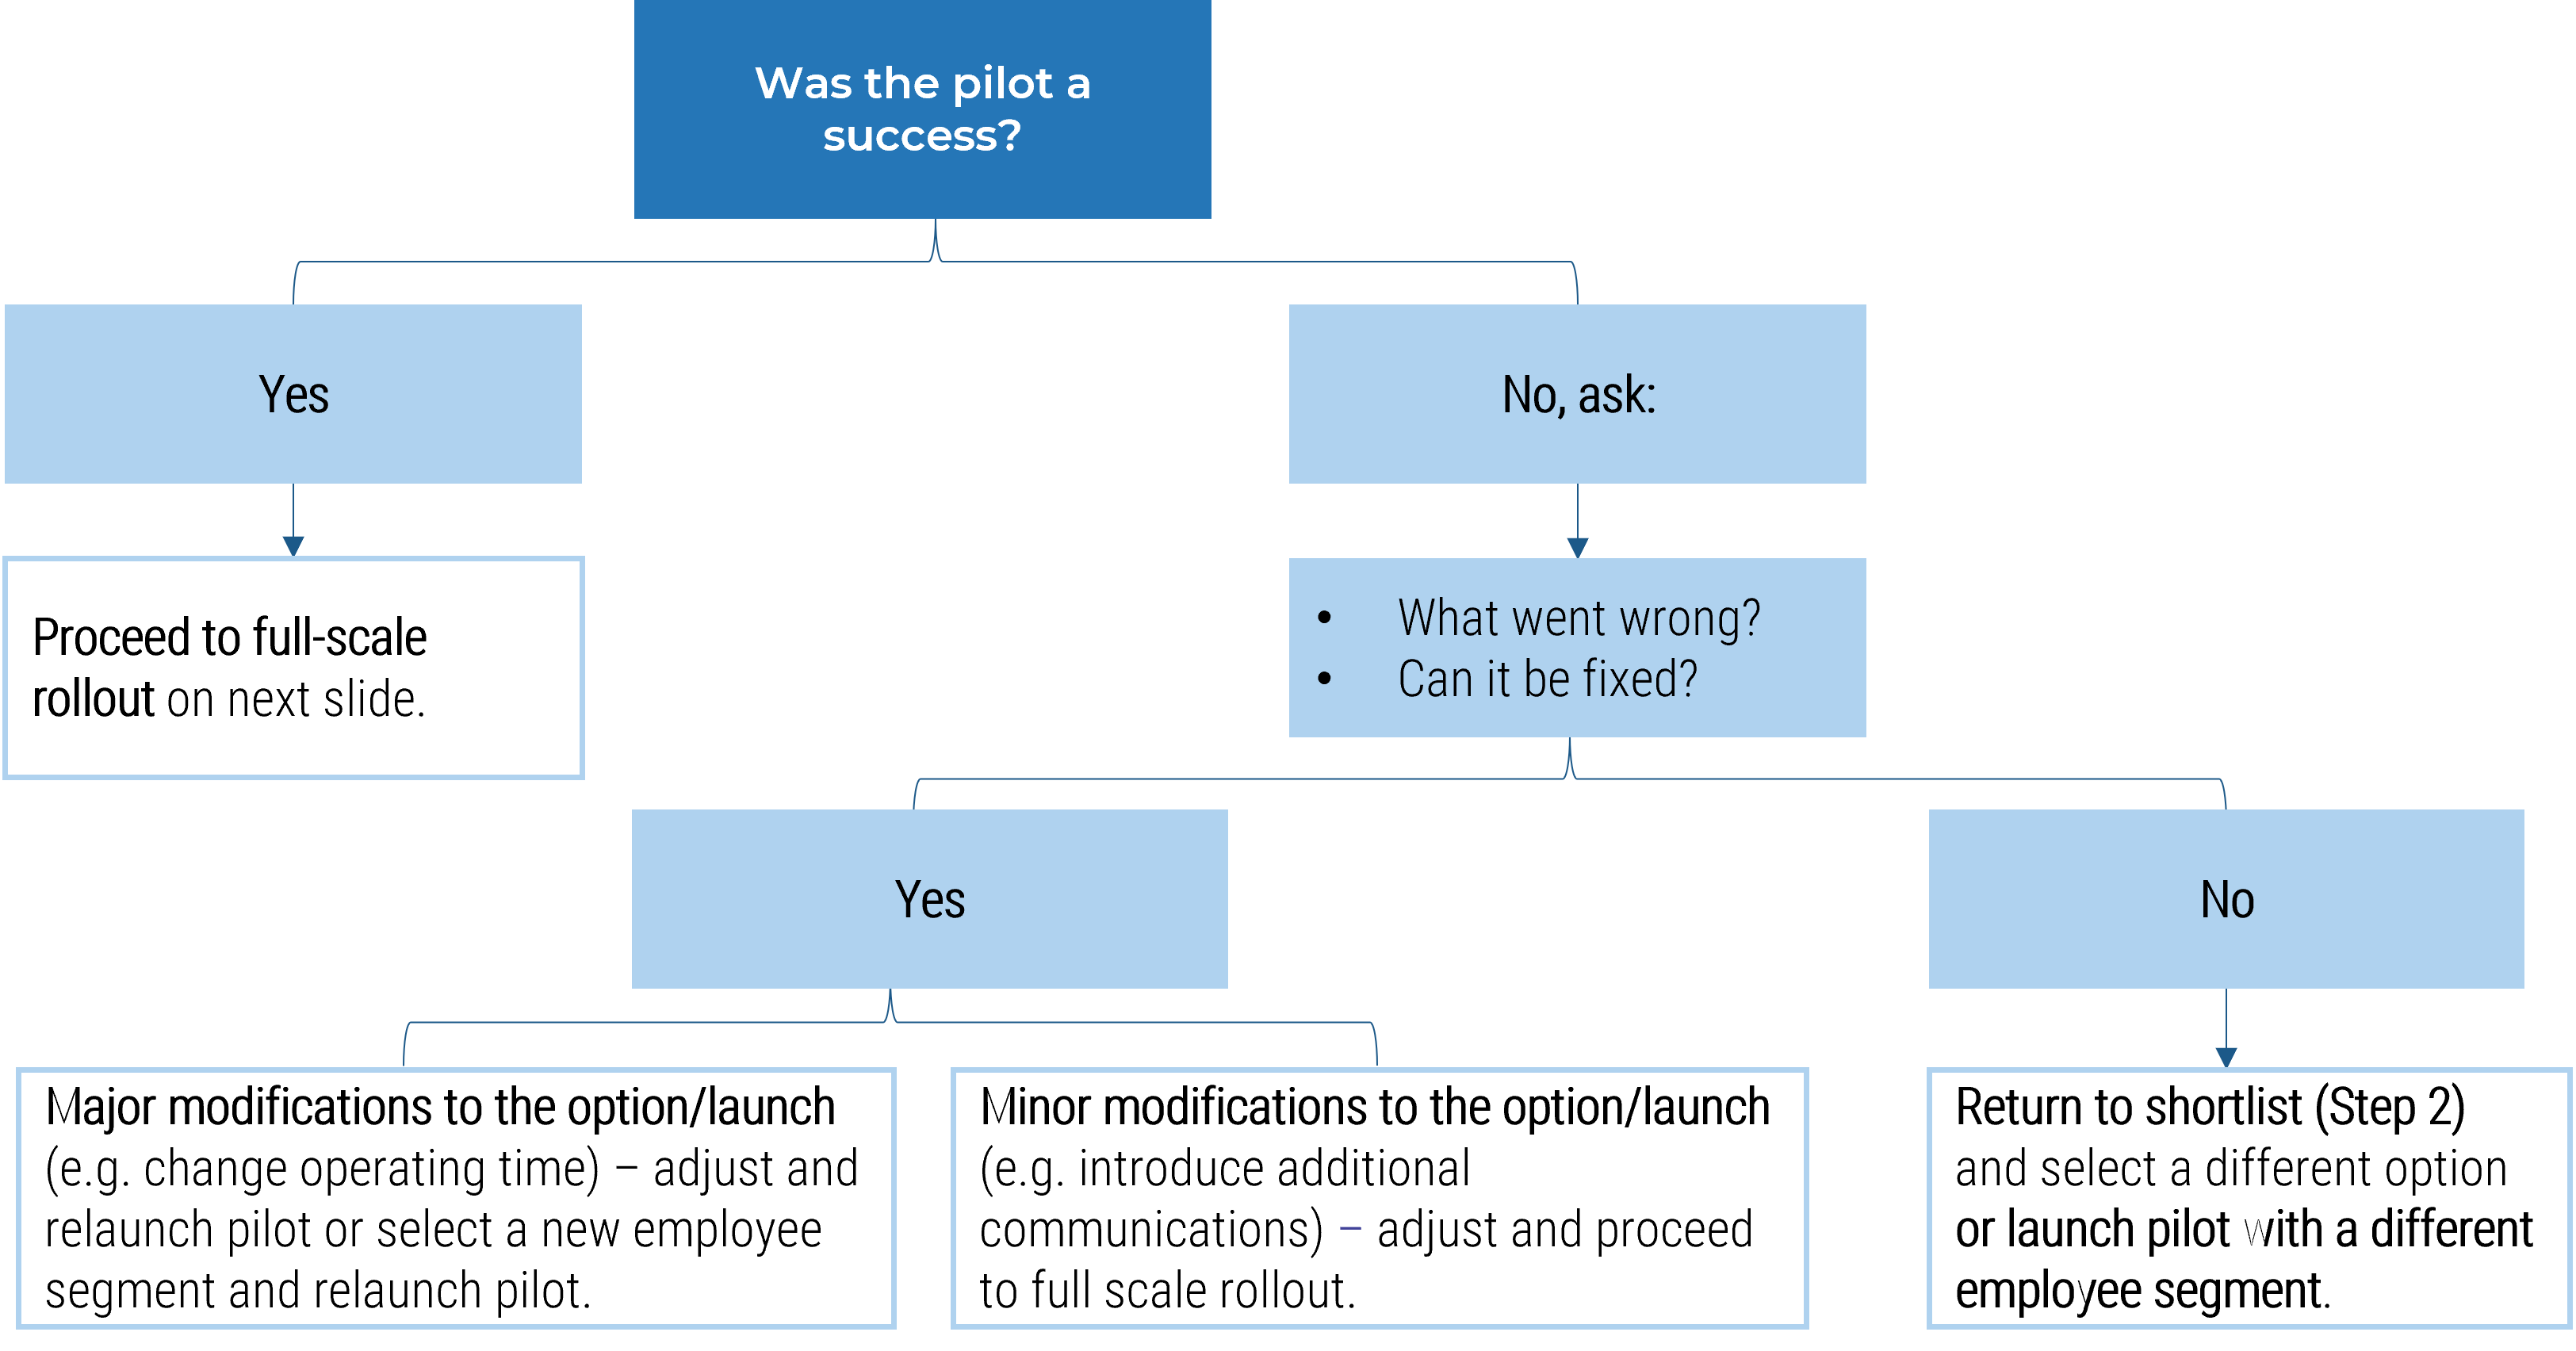 This is an image of the flow chart used to assess the pilot's success and determine the next steps.  It will help you to determine whether you will Proceed to full-scale rollout on next slide, Major modifications to the option/launch (e.g. change operating time) – adjust and relaunch pilot or select a new employee segment and relaunch pilot, Minor modifications to the option/launch (e.g. introduce additional communications) – adjust and proceed to full scale rollout, or Return to shortlist (Step 2) and select a different option or launch pilot with a different employee segment.